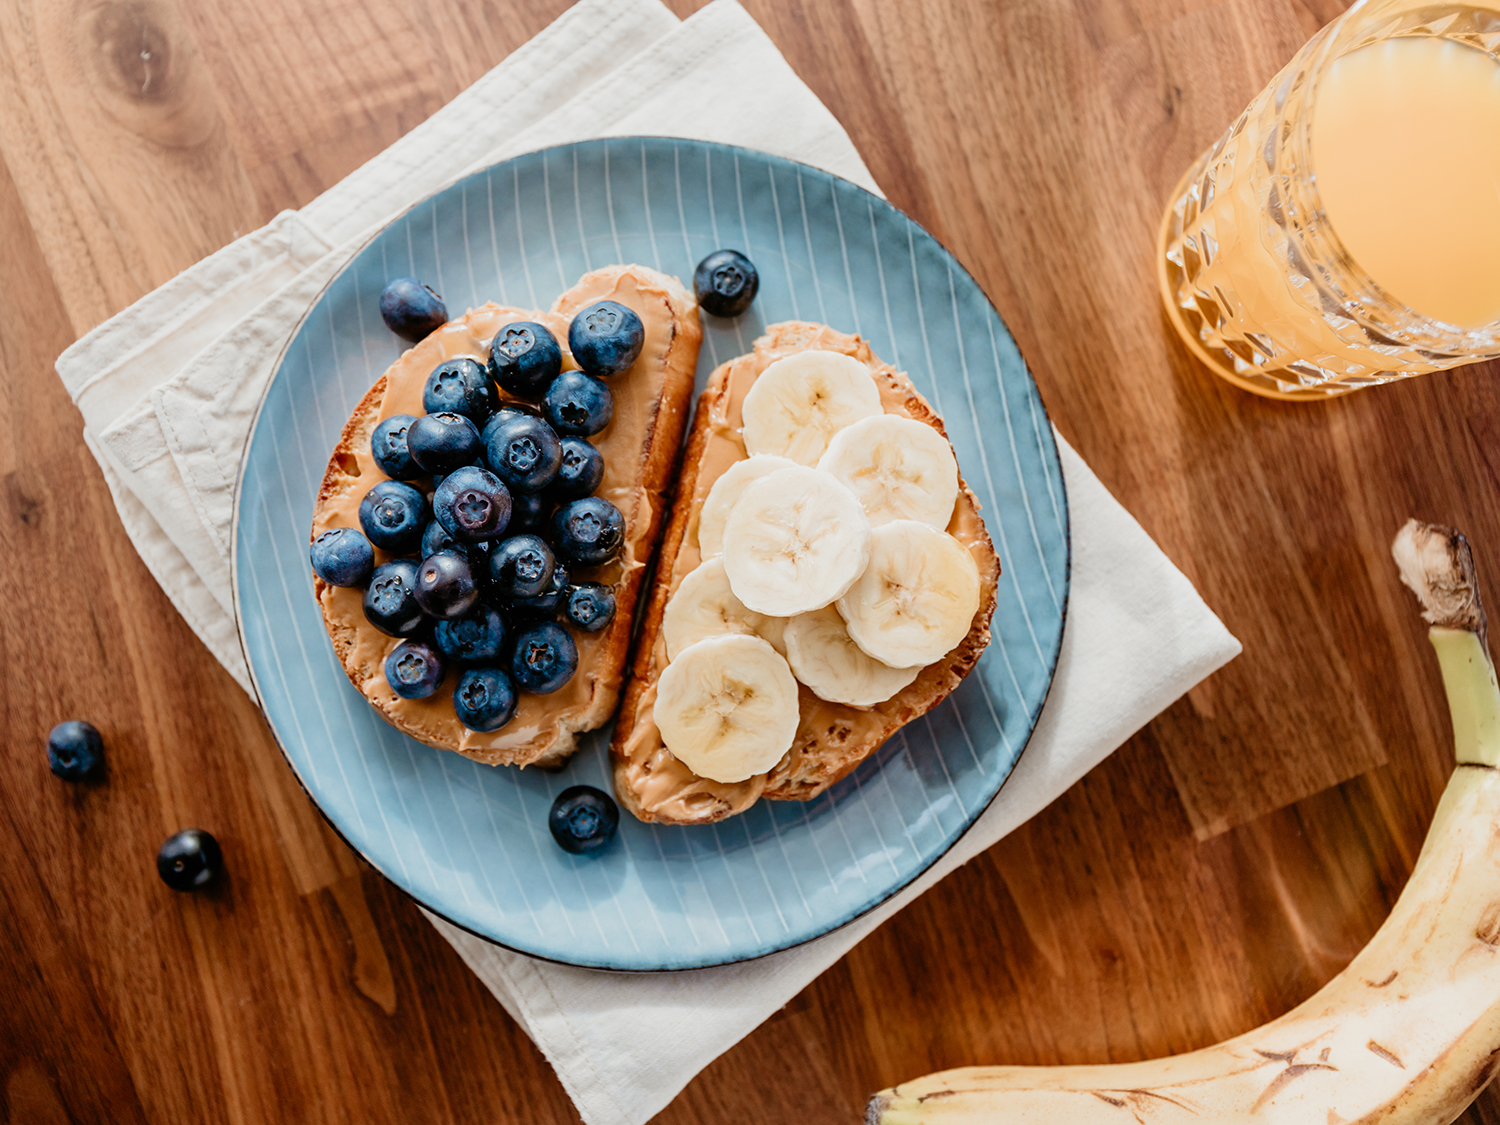 Two toasts with peanut butter, blueberry and banana. Healthy breakfast concept, top view.